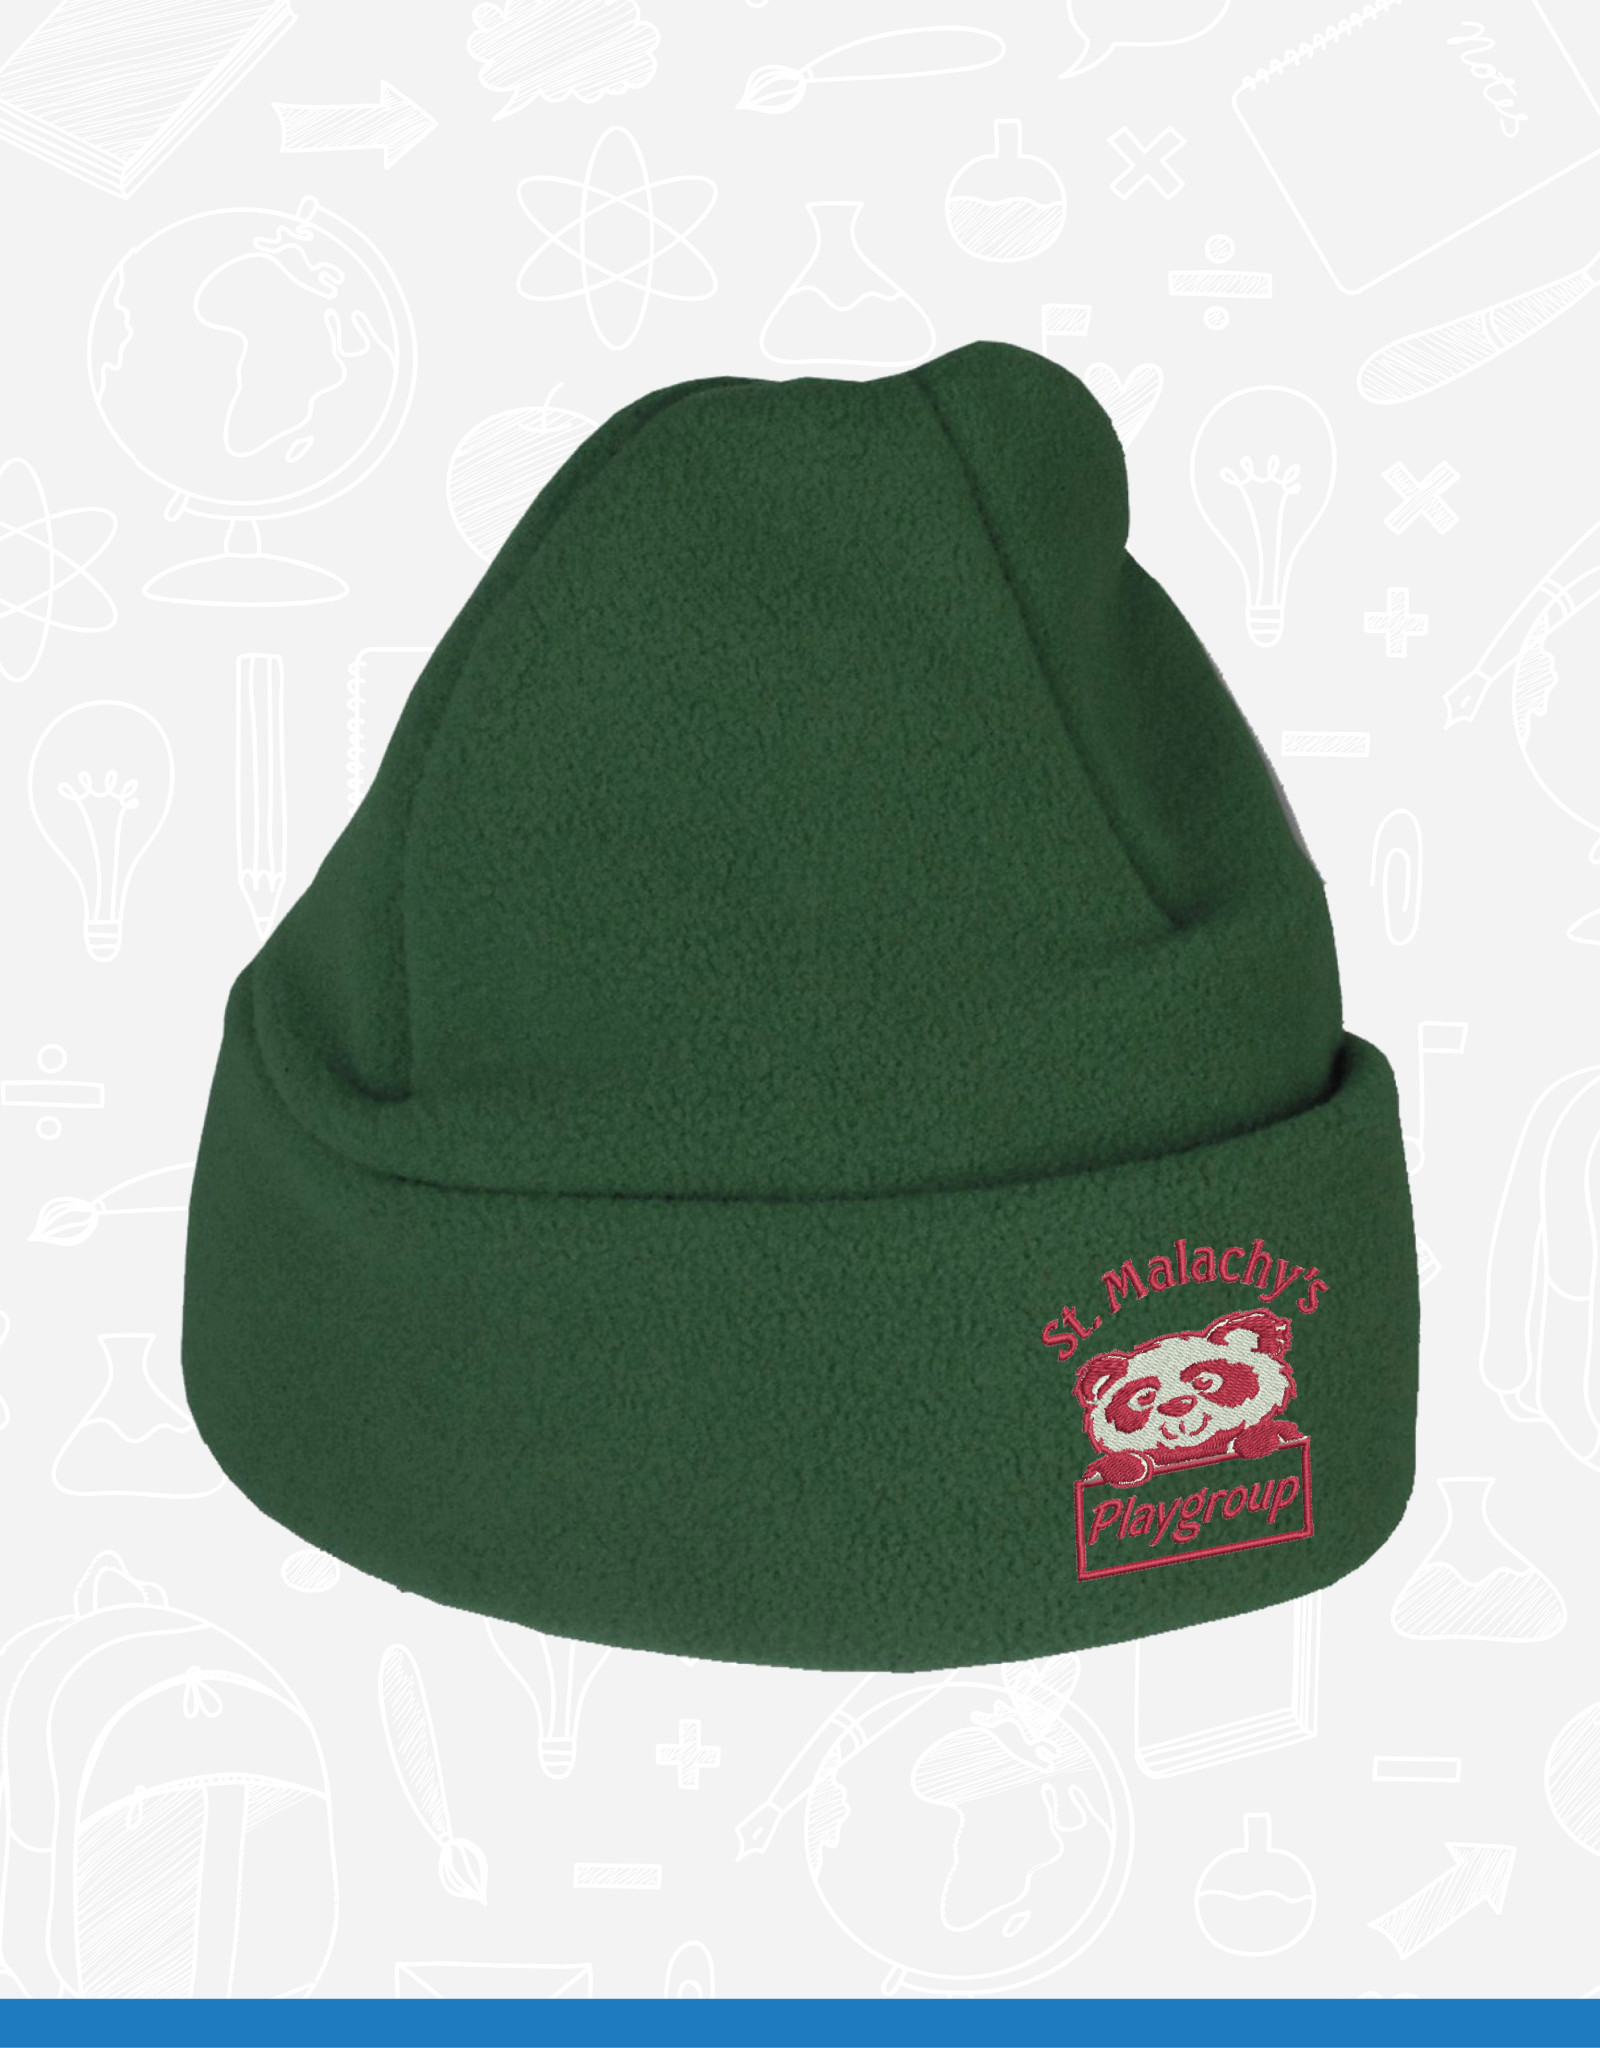 William Turner St Malachy's Playgroup Fleece Hat (FH99)